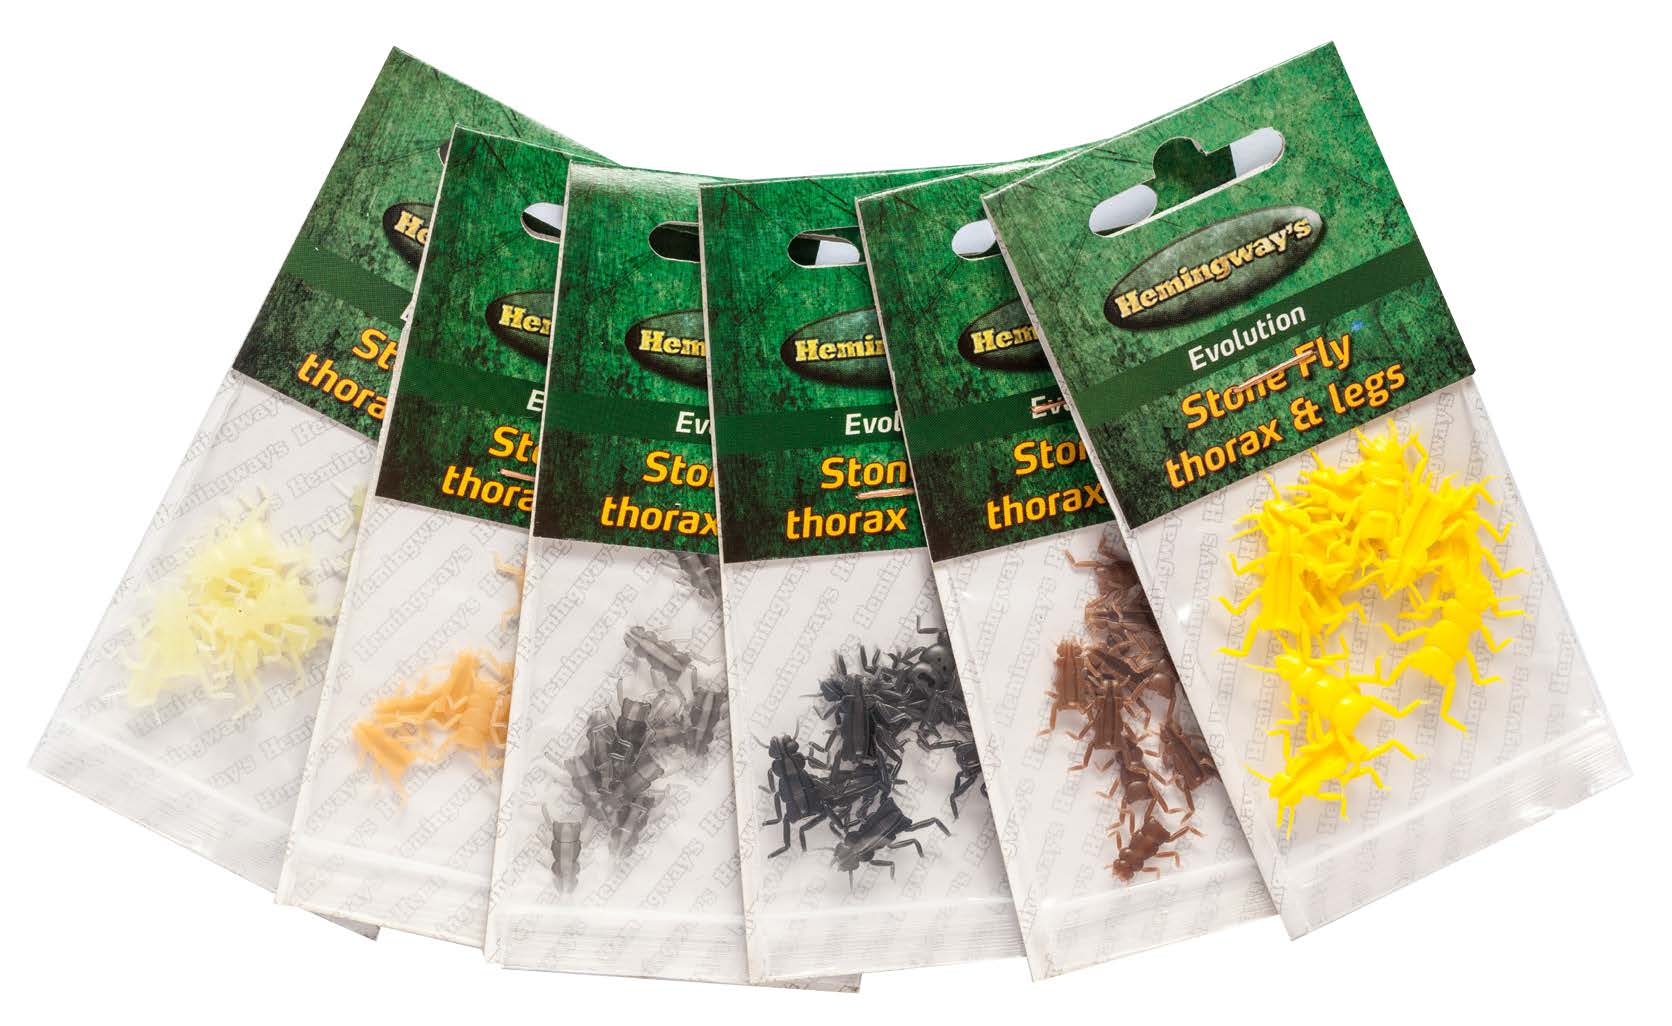 Hemingway's Evolution Stone Fly Thorax & Legs Extra Large Golden Yellow Fly Tying Materials